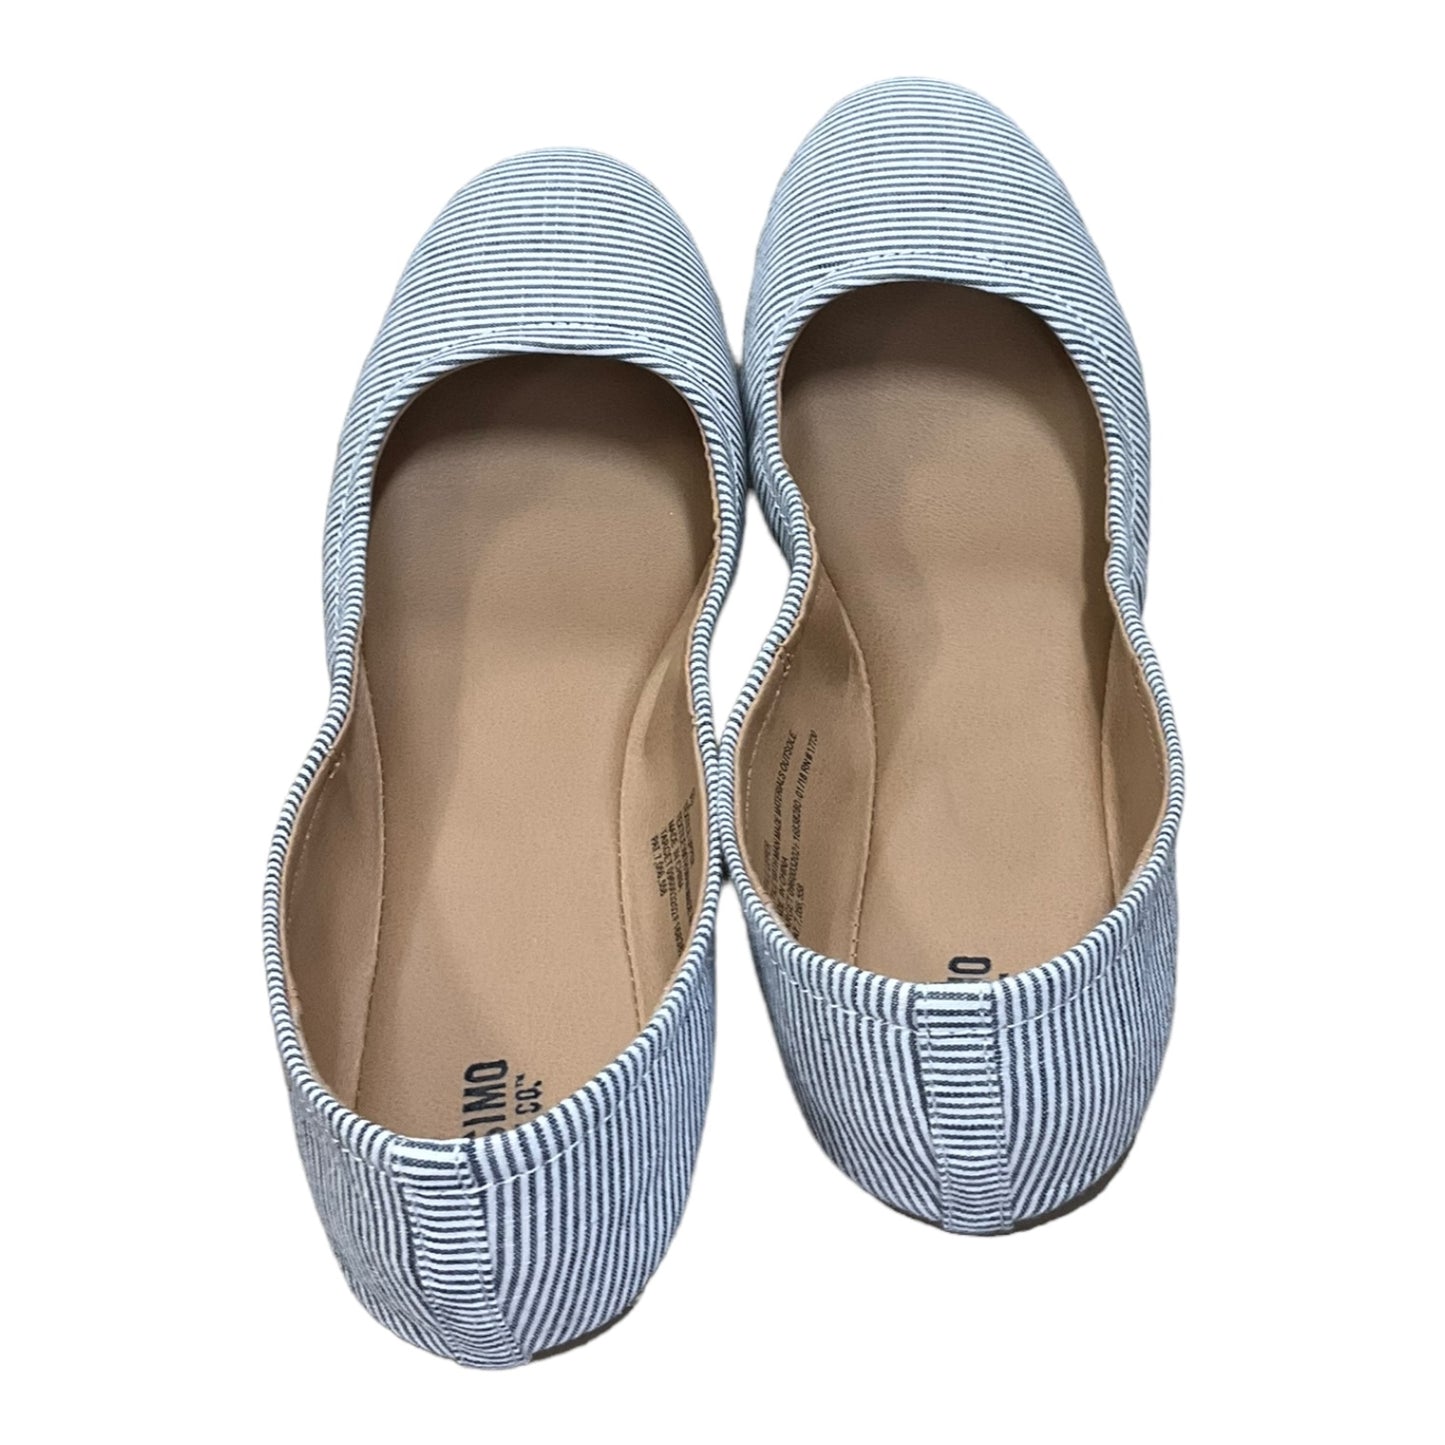 Shoes Flats By Mossimo  Size: 9.5